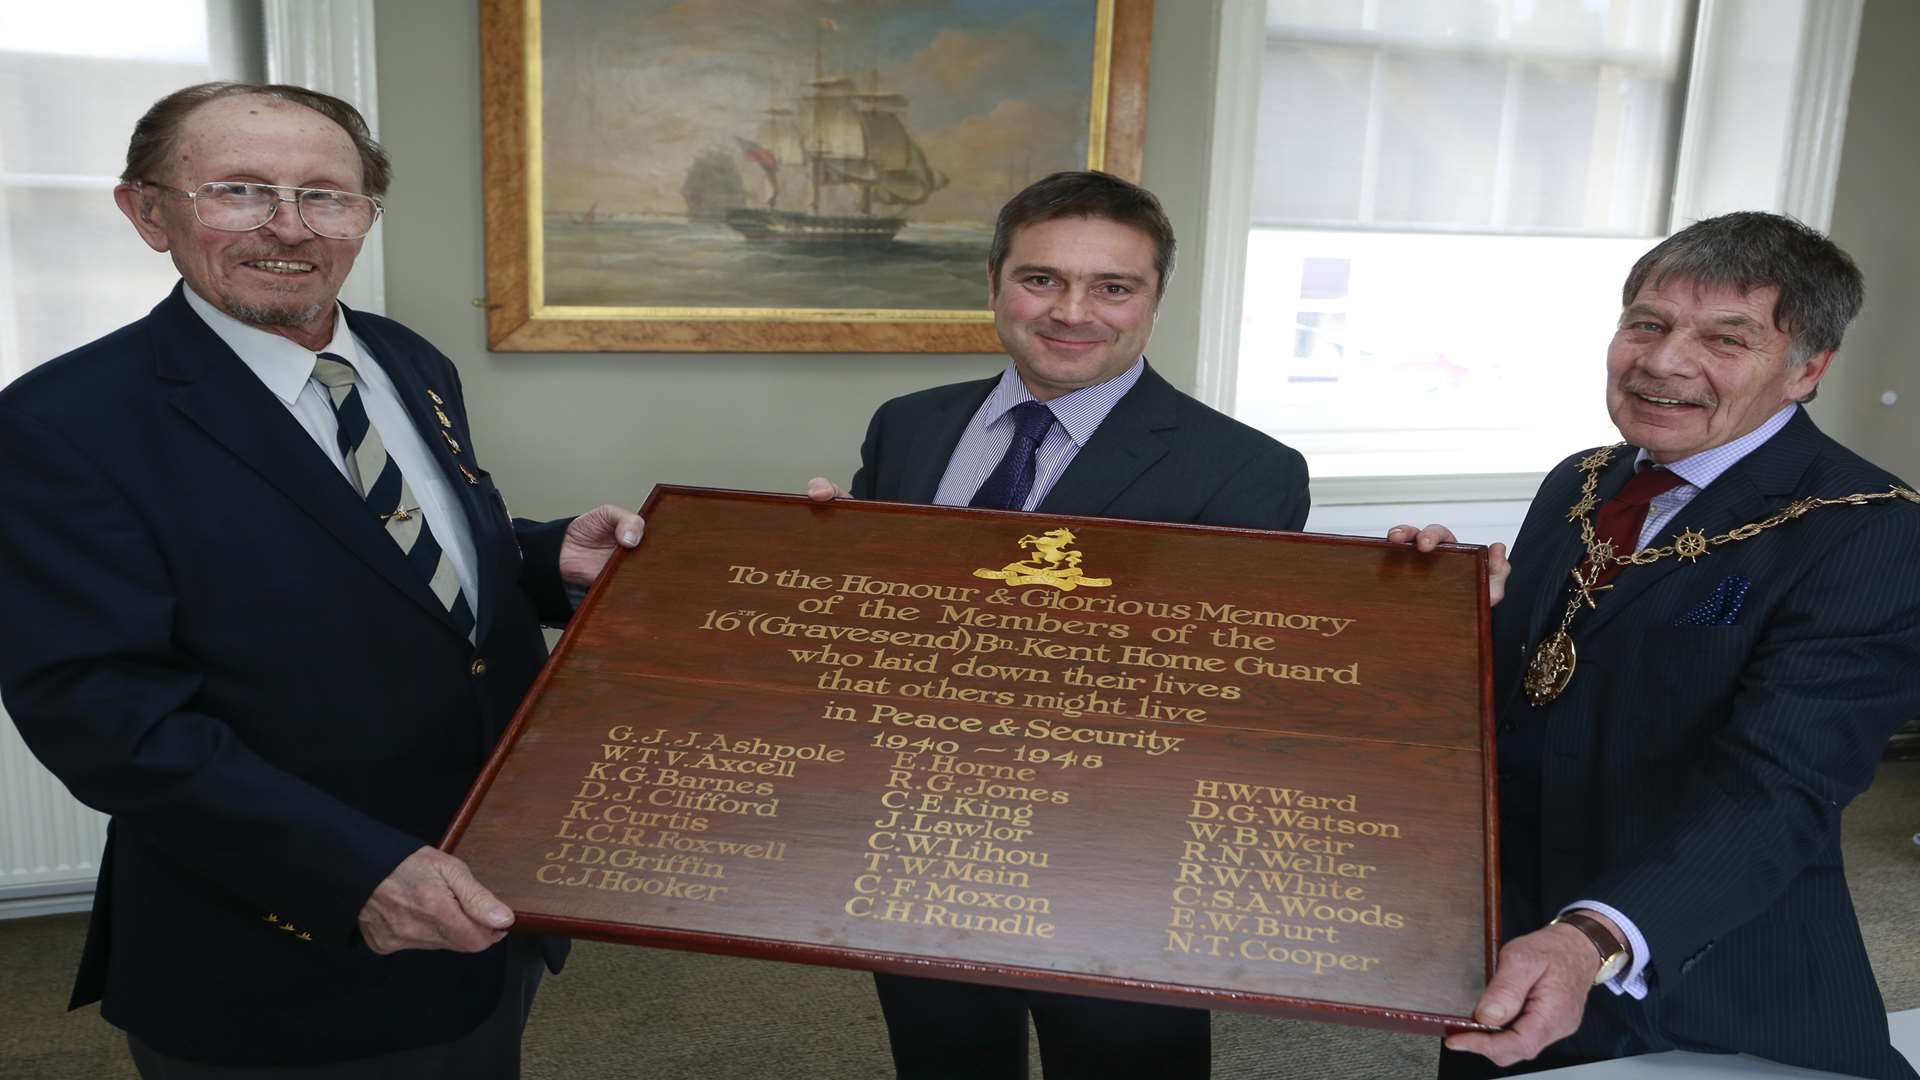 Tony Arnold, Matthew Kerr, Mayor Mick Wenban. Handing over of large plaque by the Invicta Club.